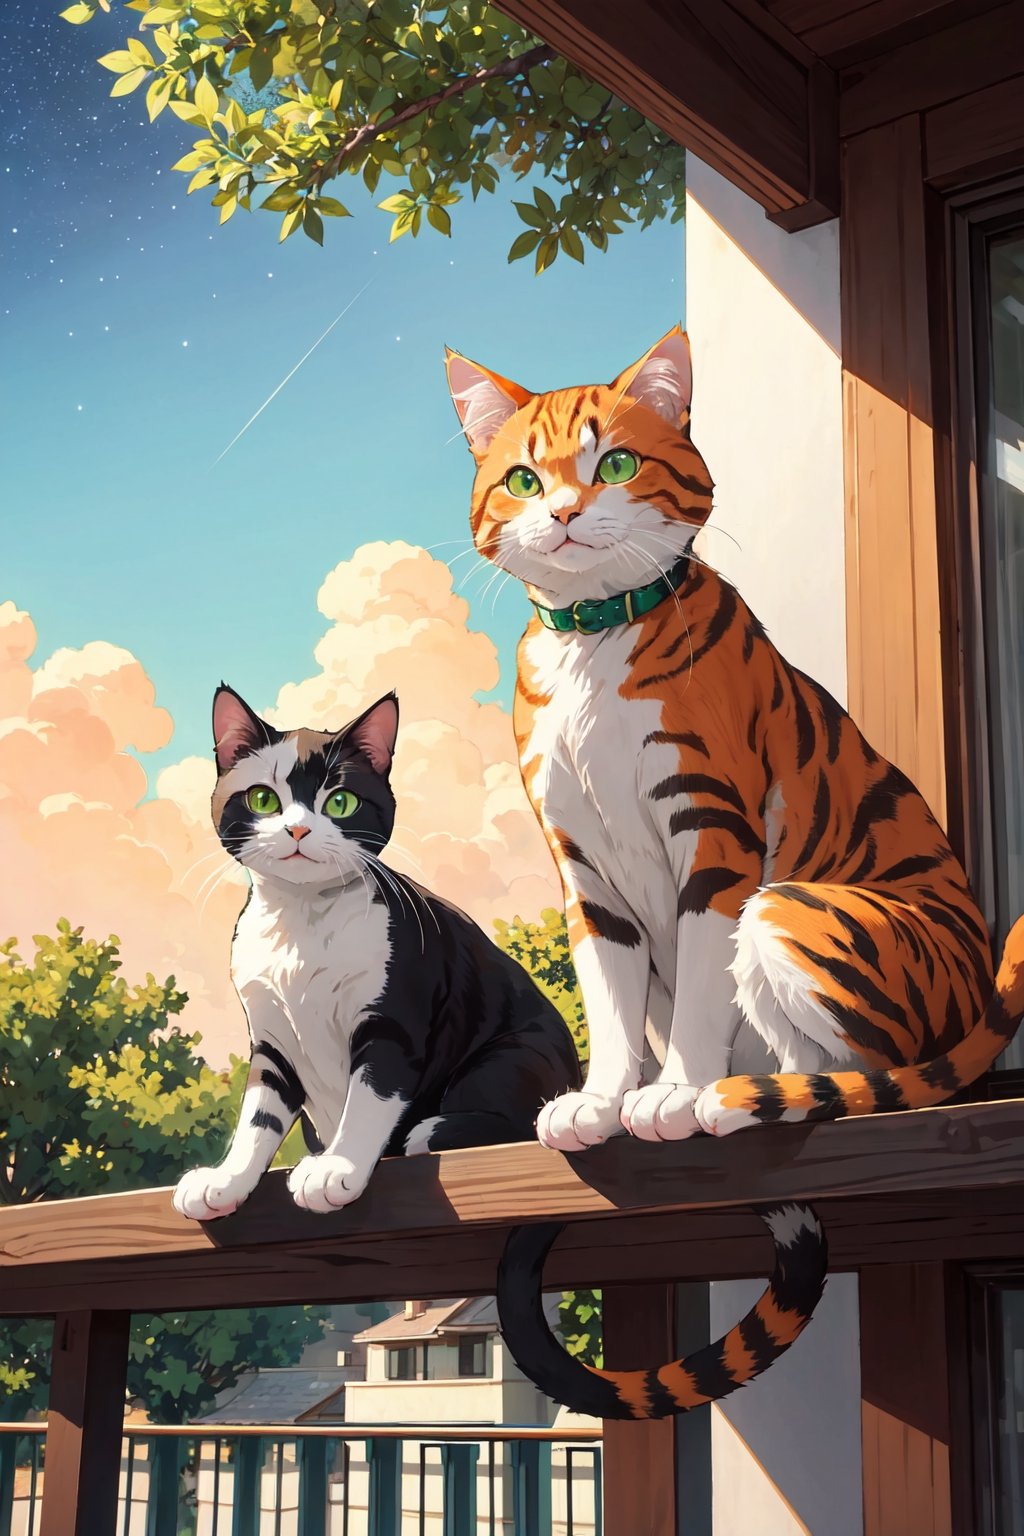 ( masterpiece )( high resolution :1.3 ) (best quality) ( character)paint,,orange,,green eyes( background ) ( high resolution :1.3 ) ( best quality ) ( background ),,balcony,, in the afternoon day,, there are stars,, and trees,, (cat pose),, sitting cat pose,, cat on a wooden balcony,, (cat expression),, daydreaming,, one orange cat,, little cat